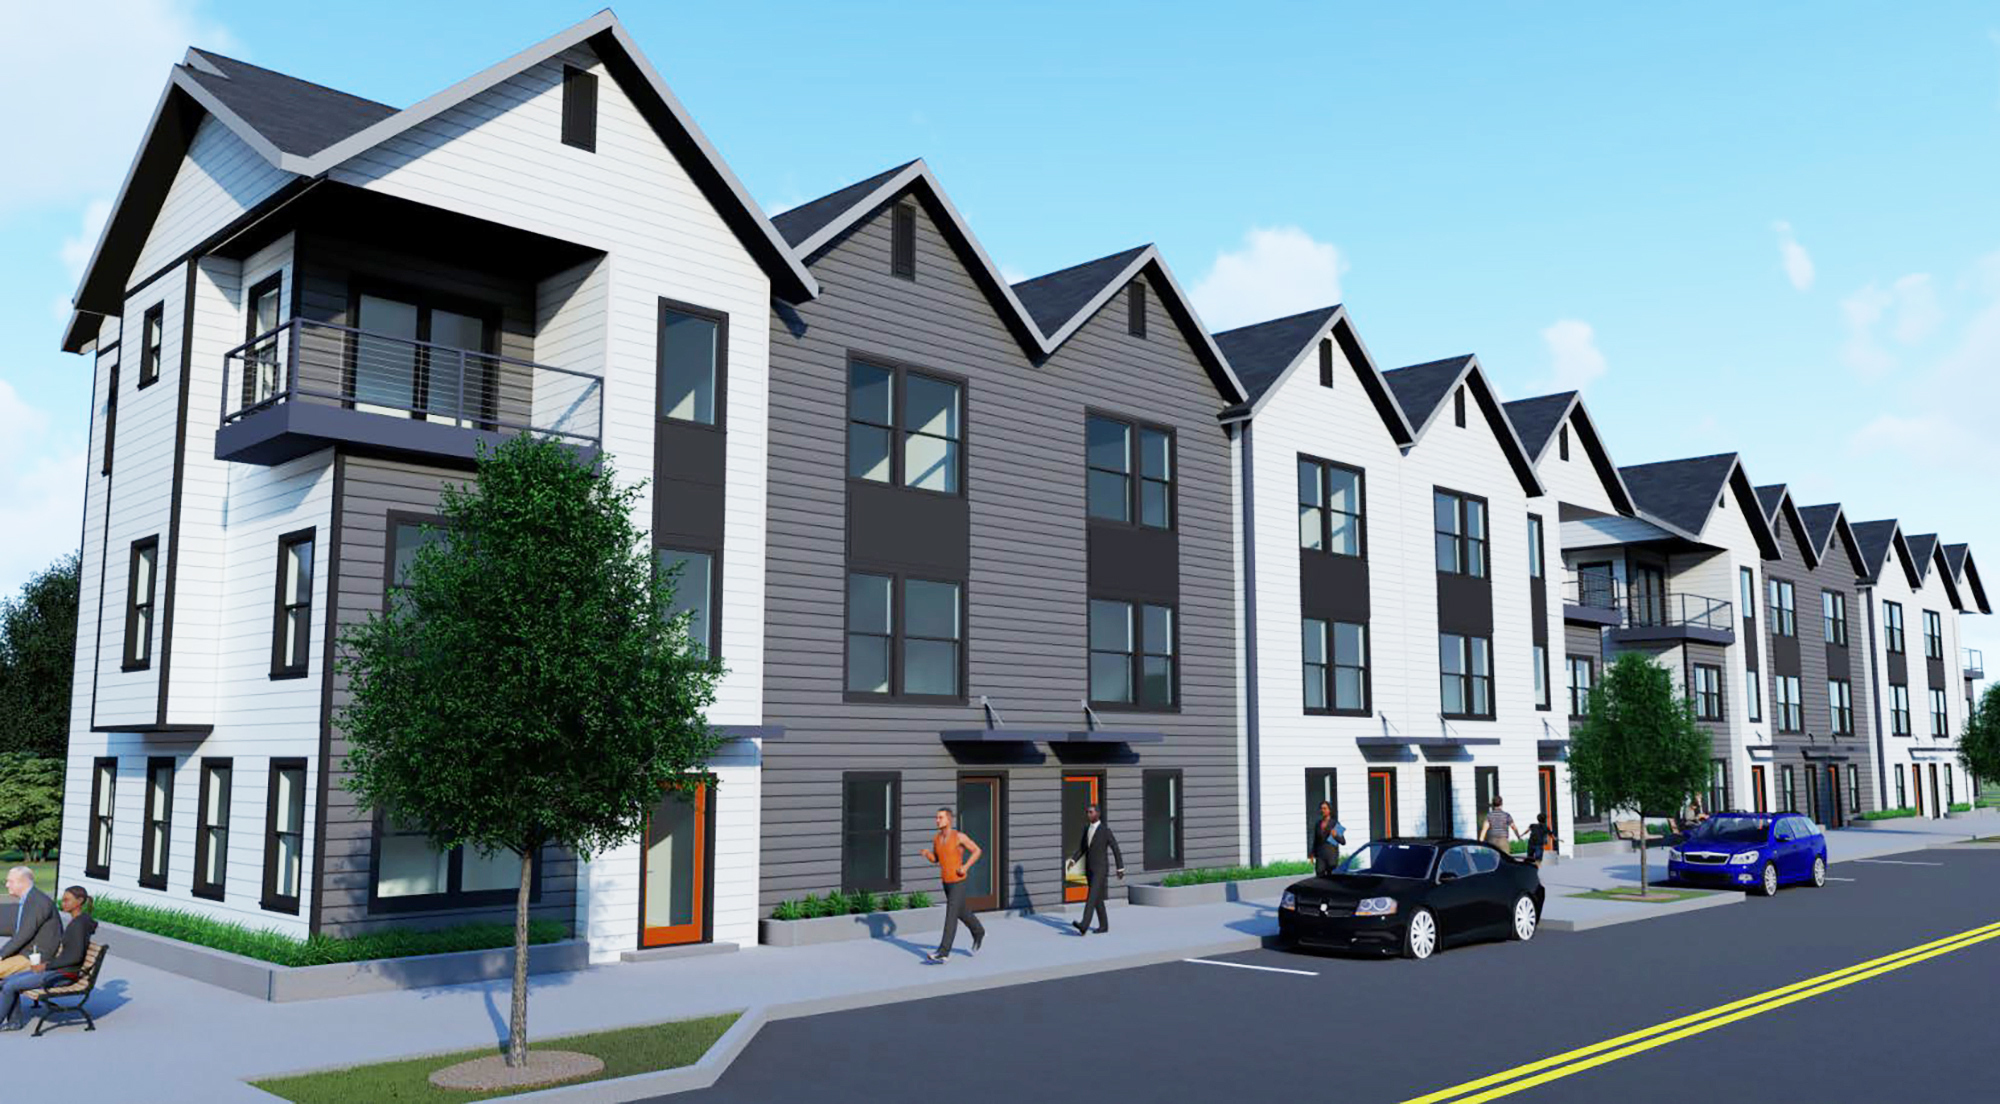 The town houses will feature a shotgun-style design with gabled roofs.